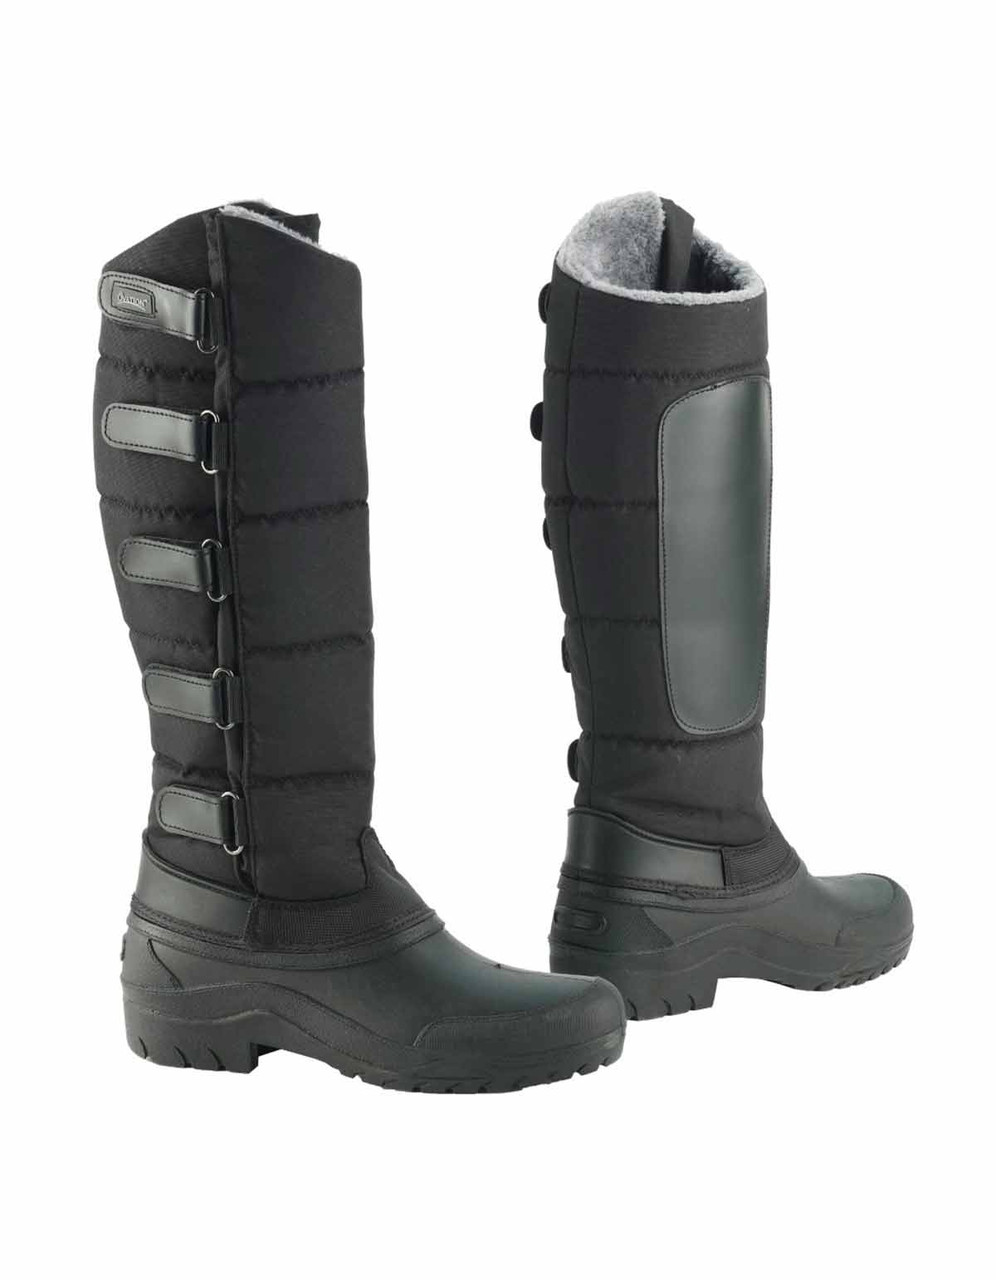 Ovation Blizzard Extreme Winter Boot - Sprucewood Tack